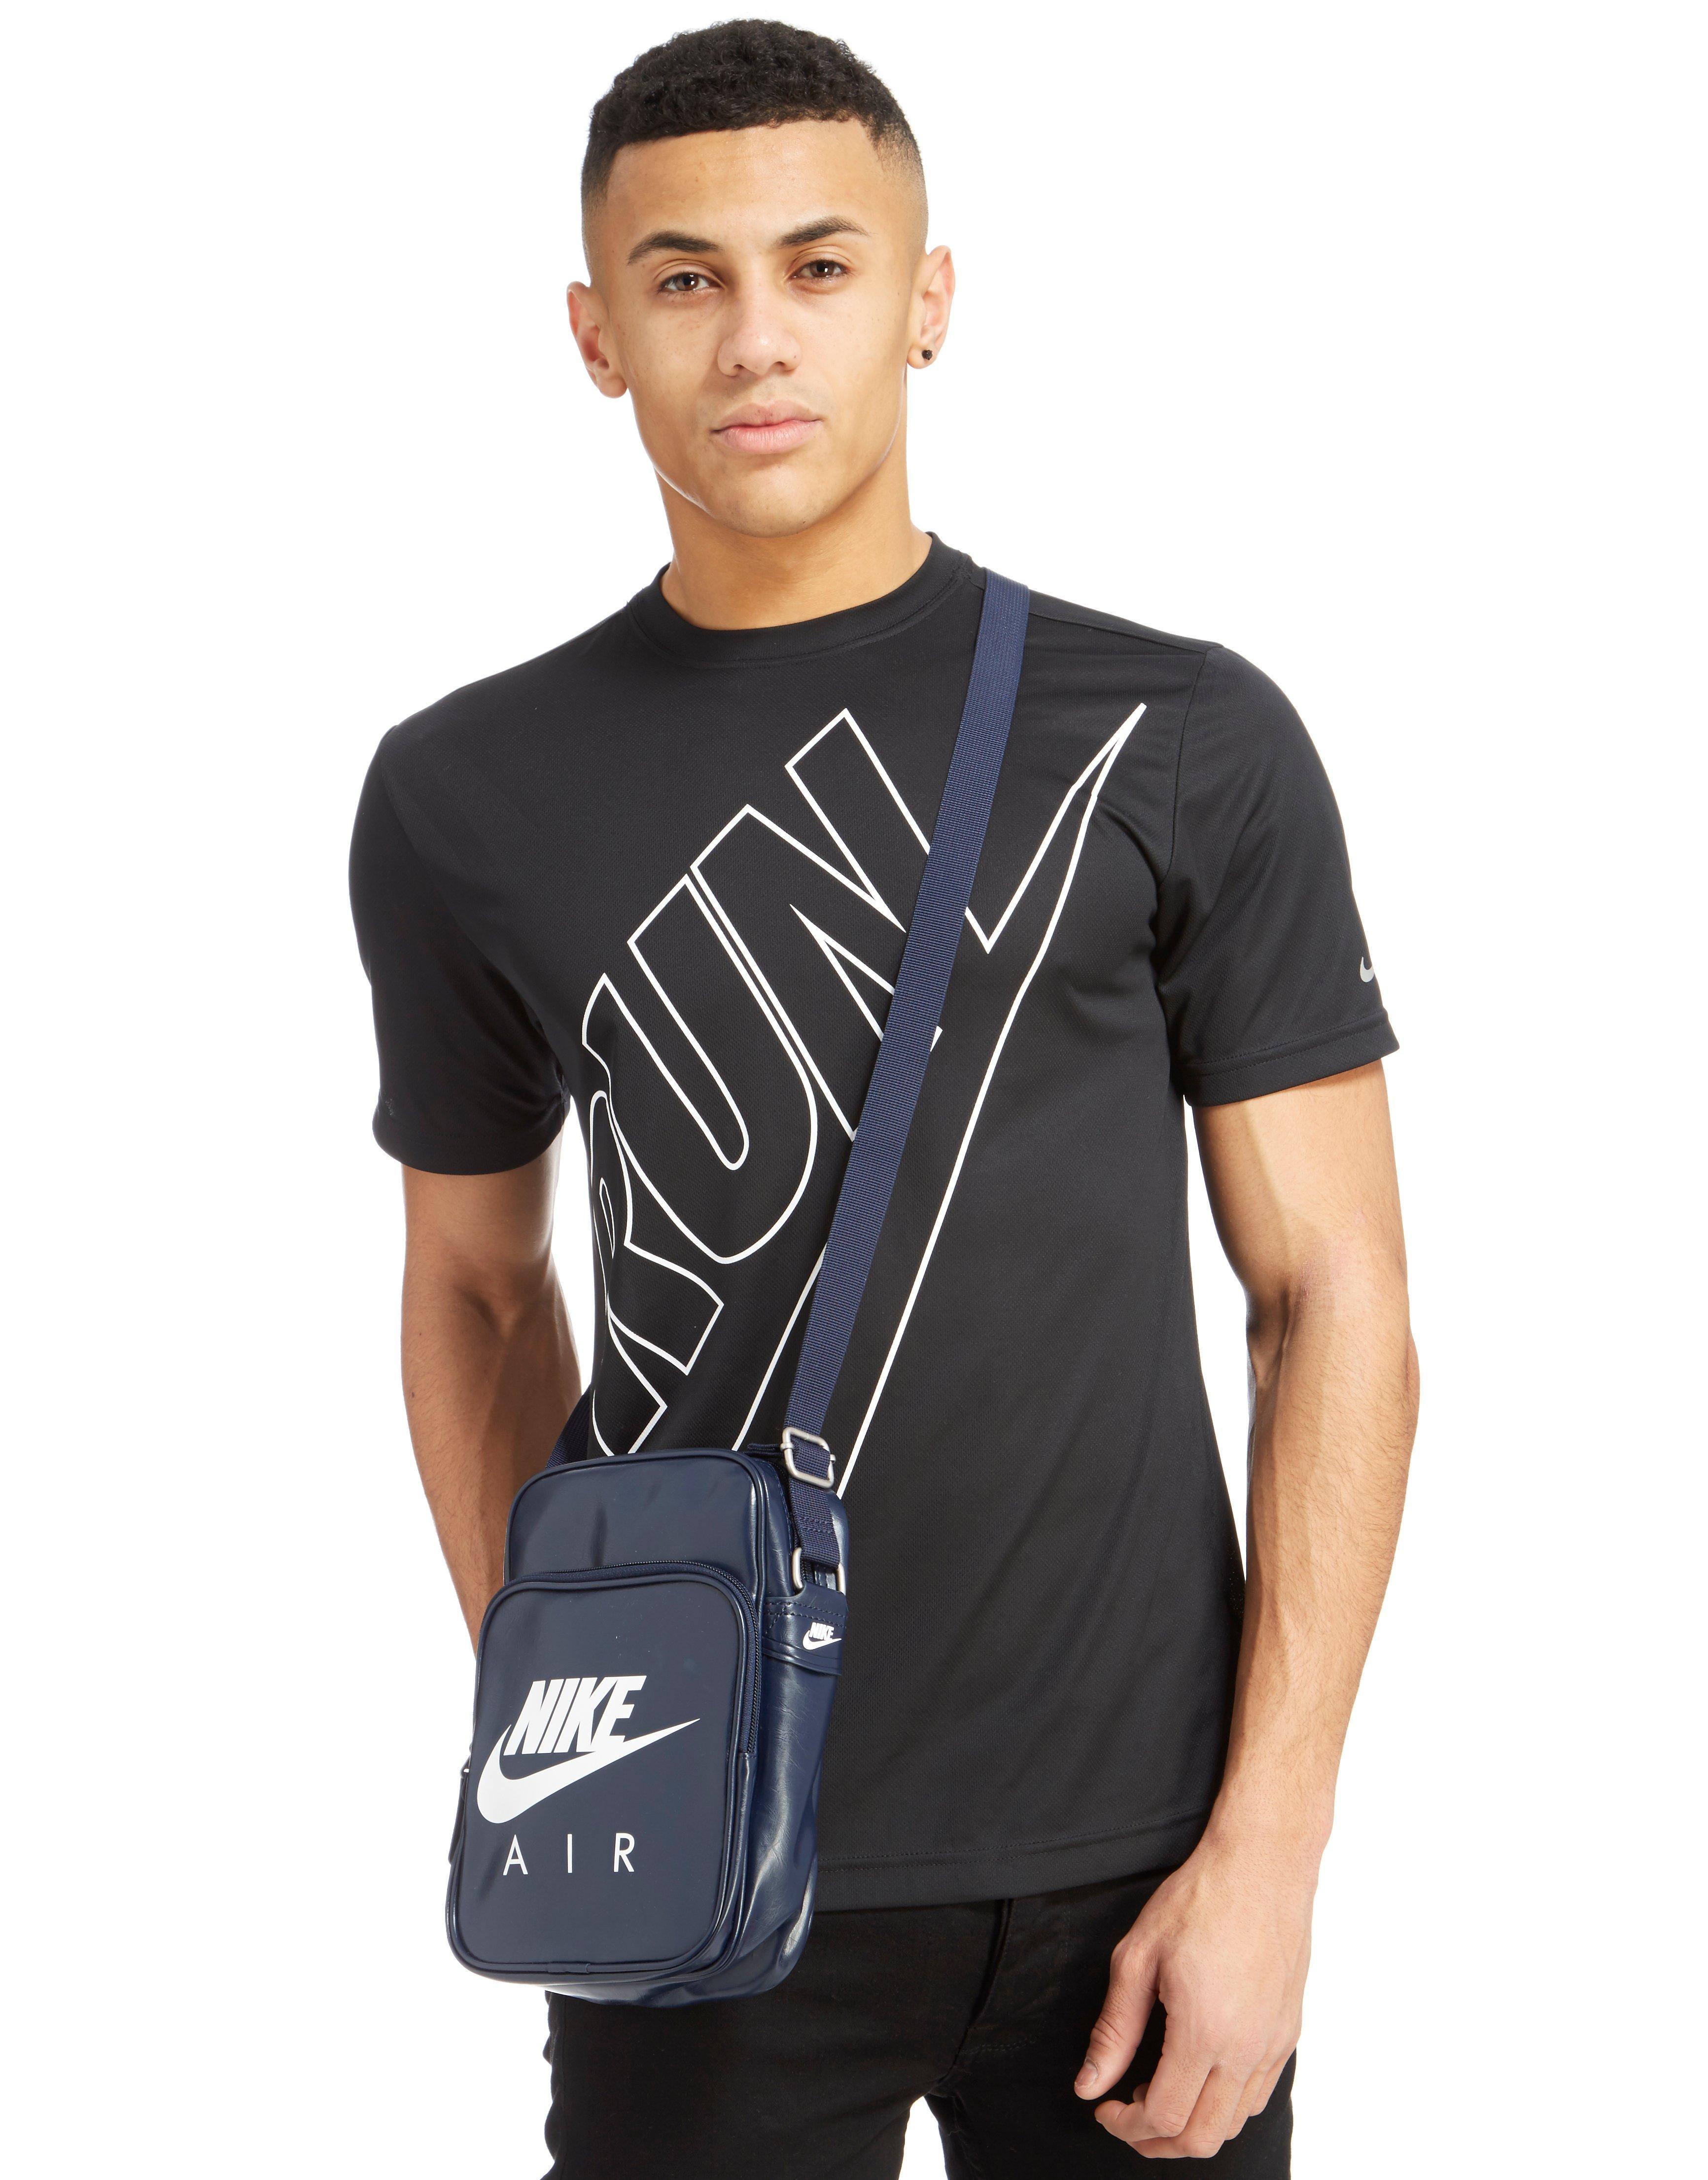 Nike Air Small Items Bag in Navy (Blue) for Men - Lyst